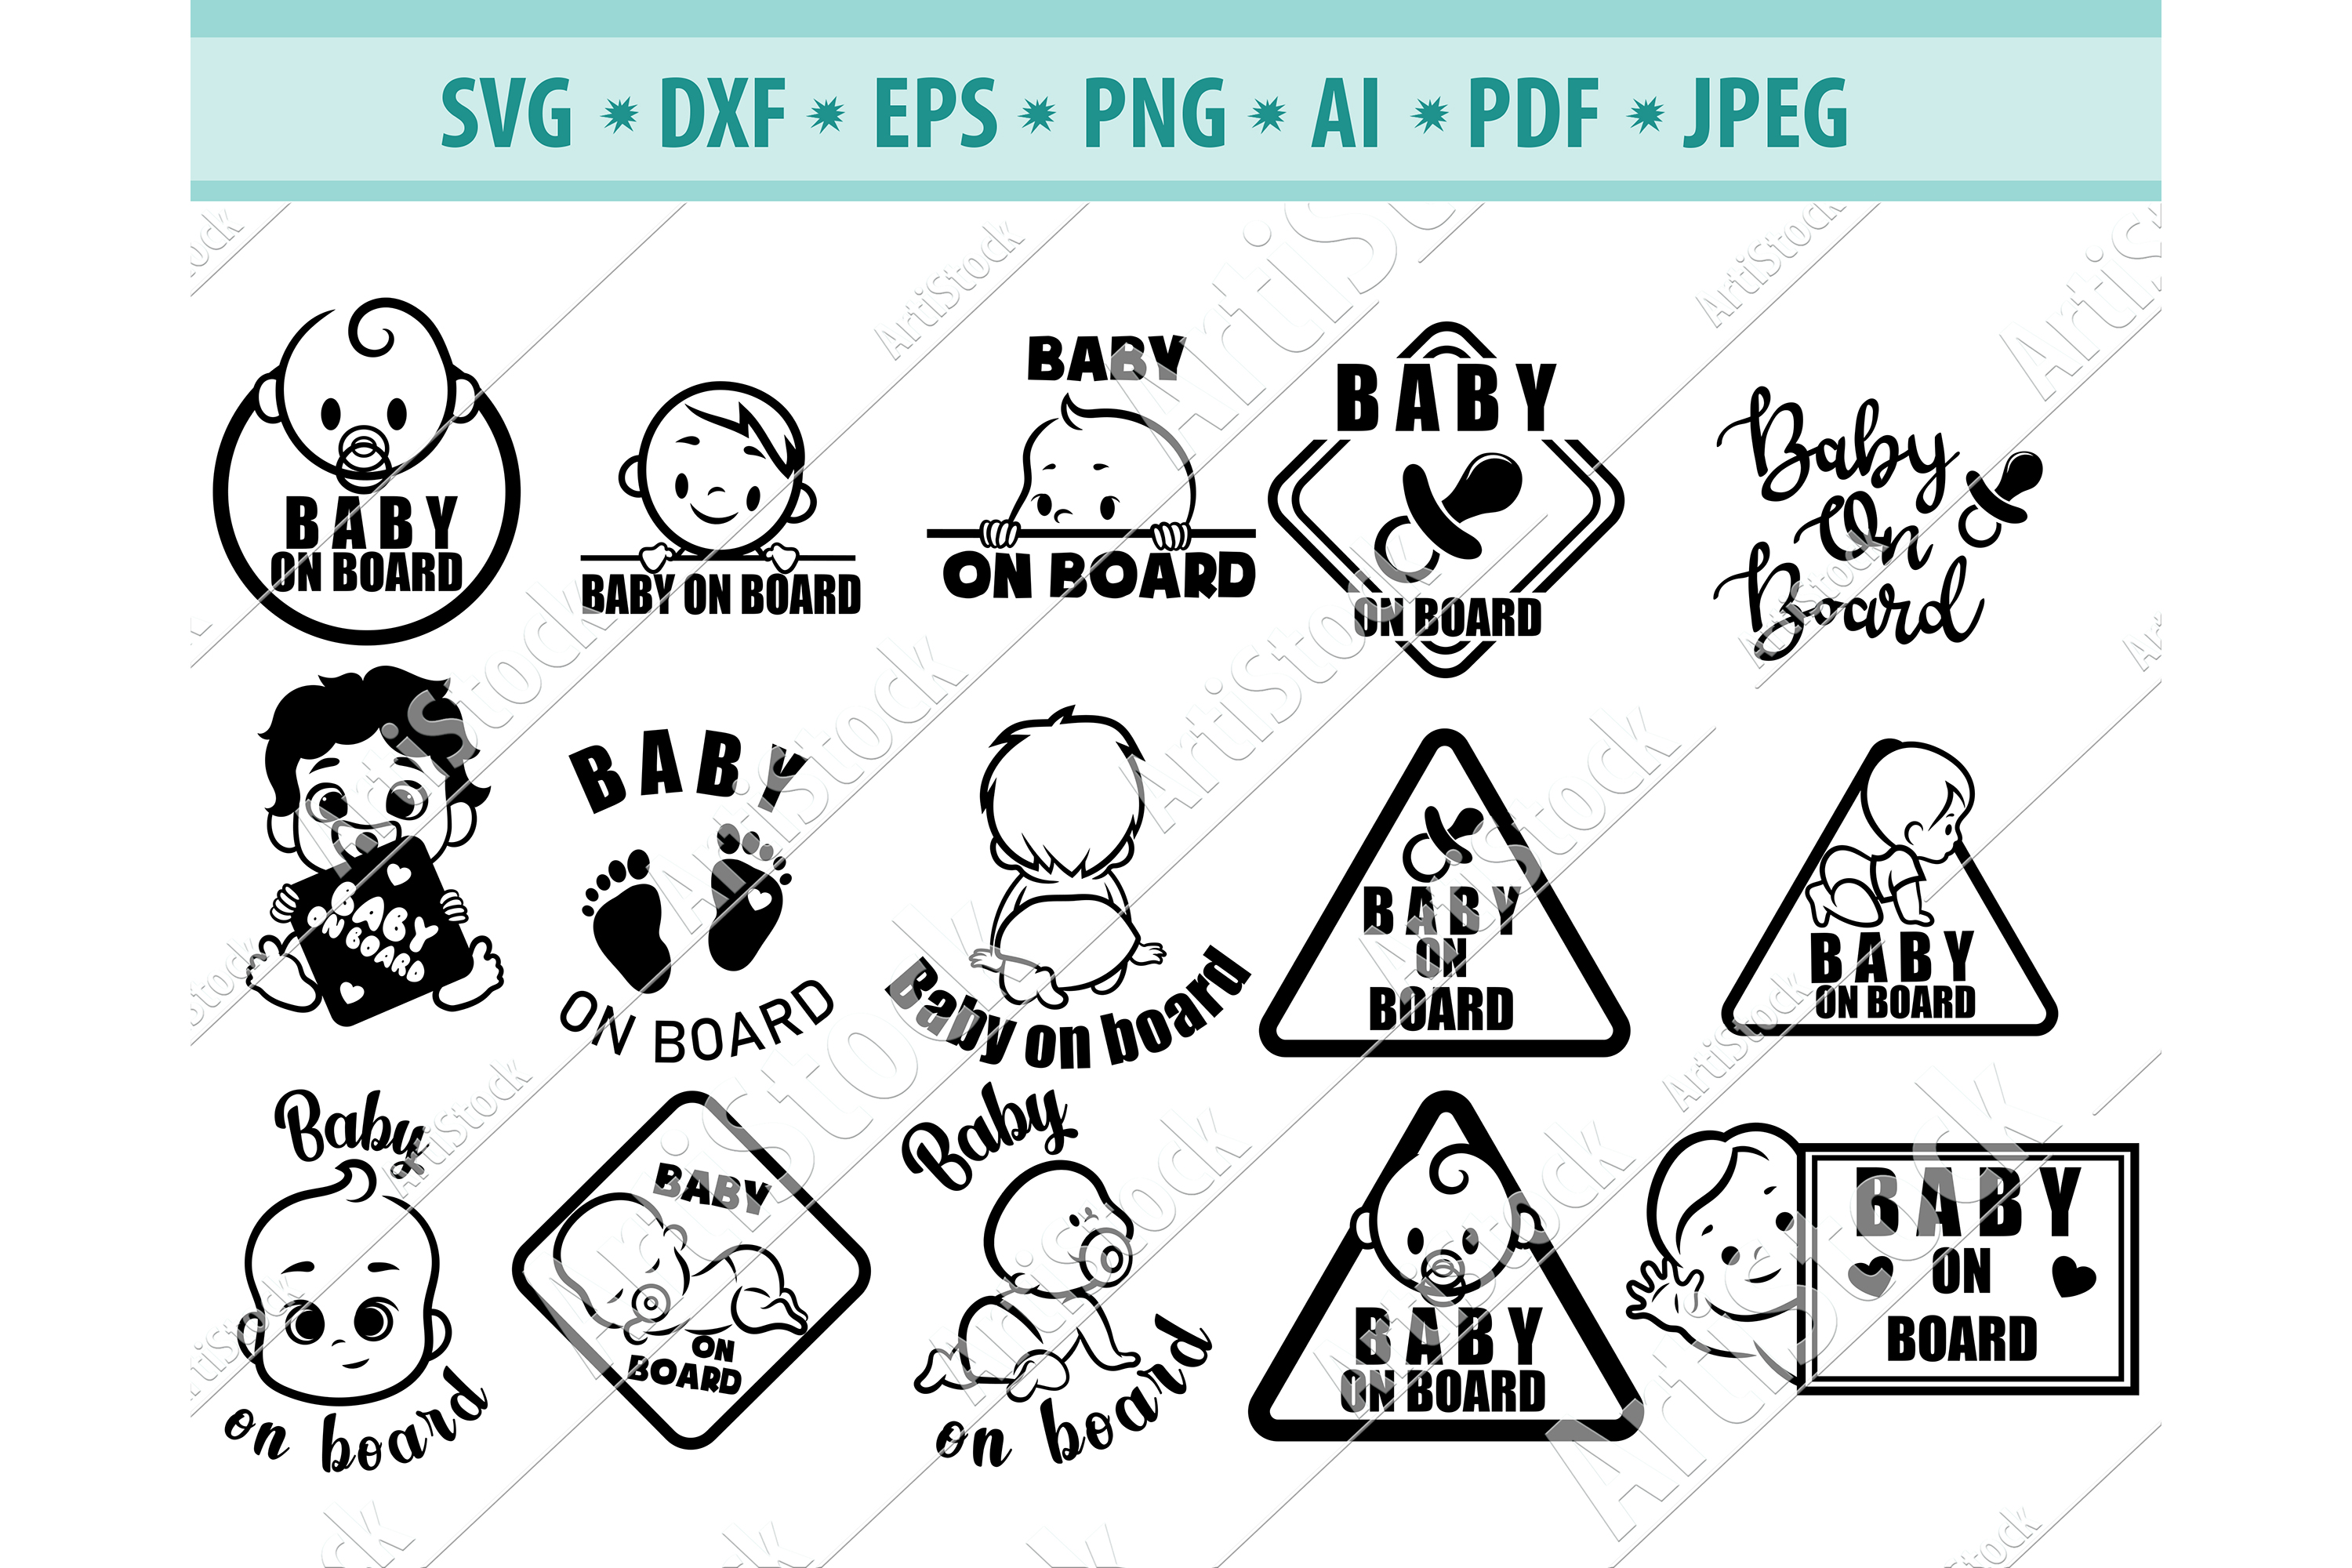 Baby On Board SVG, Pregnancy Svg, Cute Baby Png, Dxf, Eps (523159